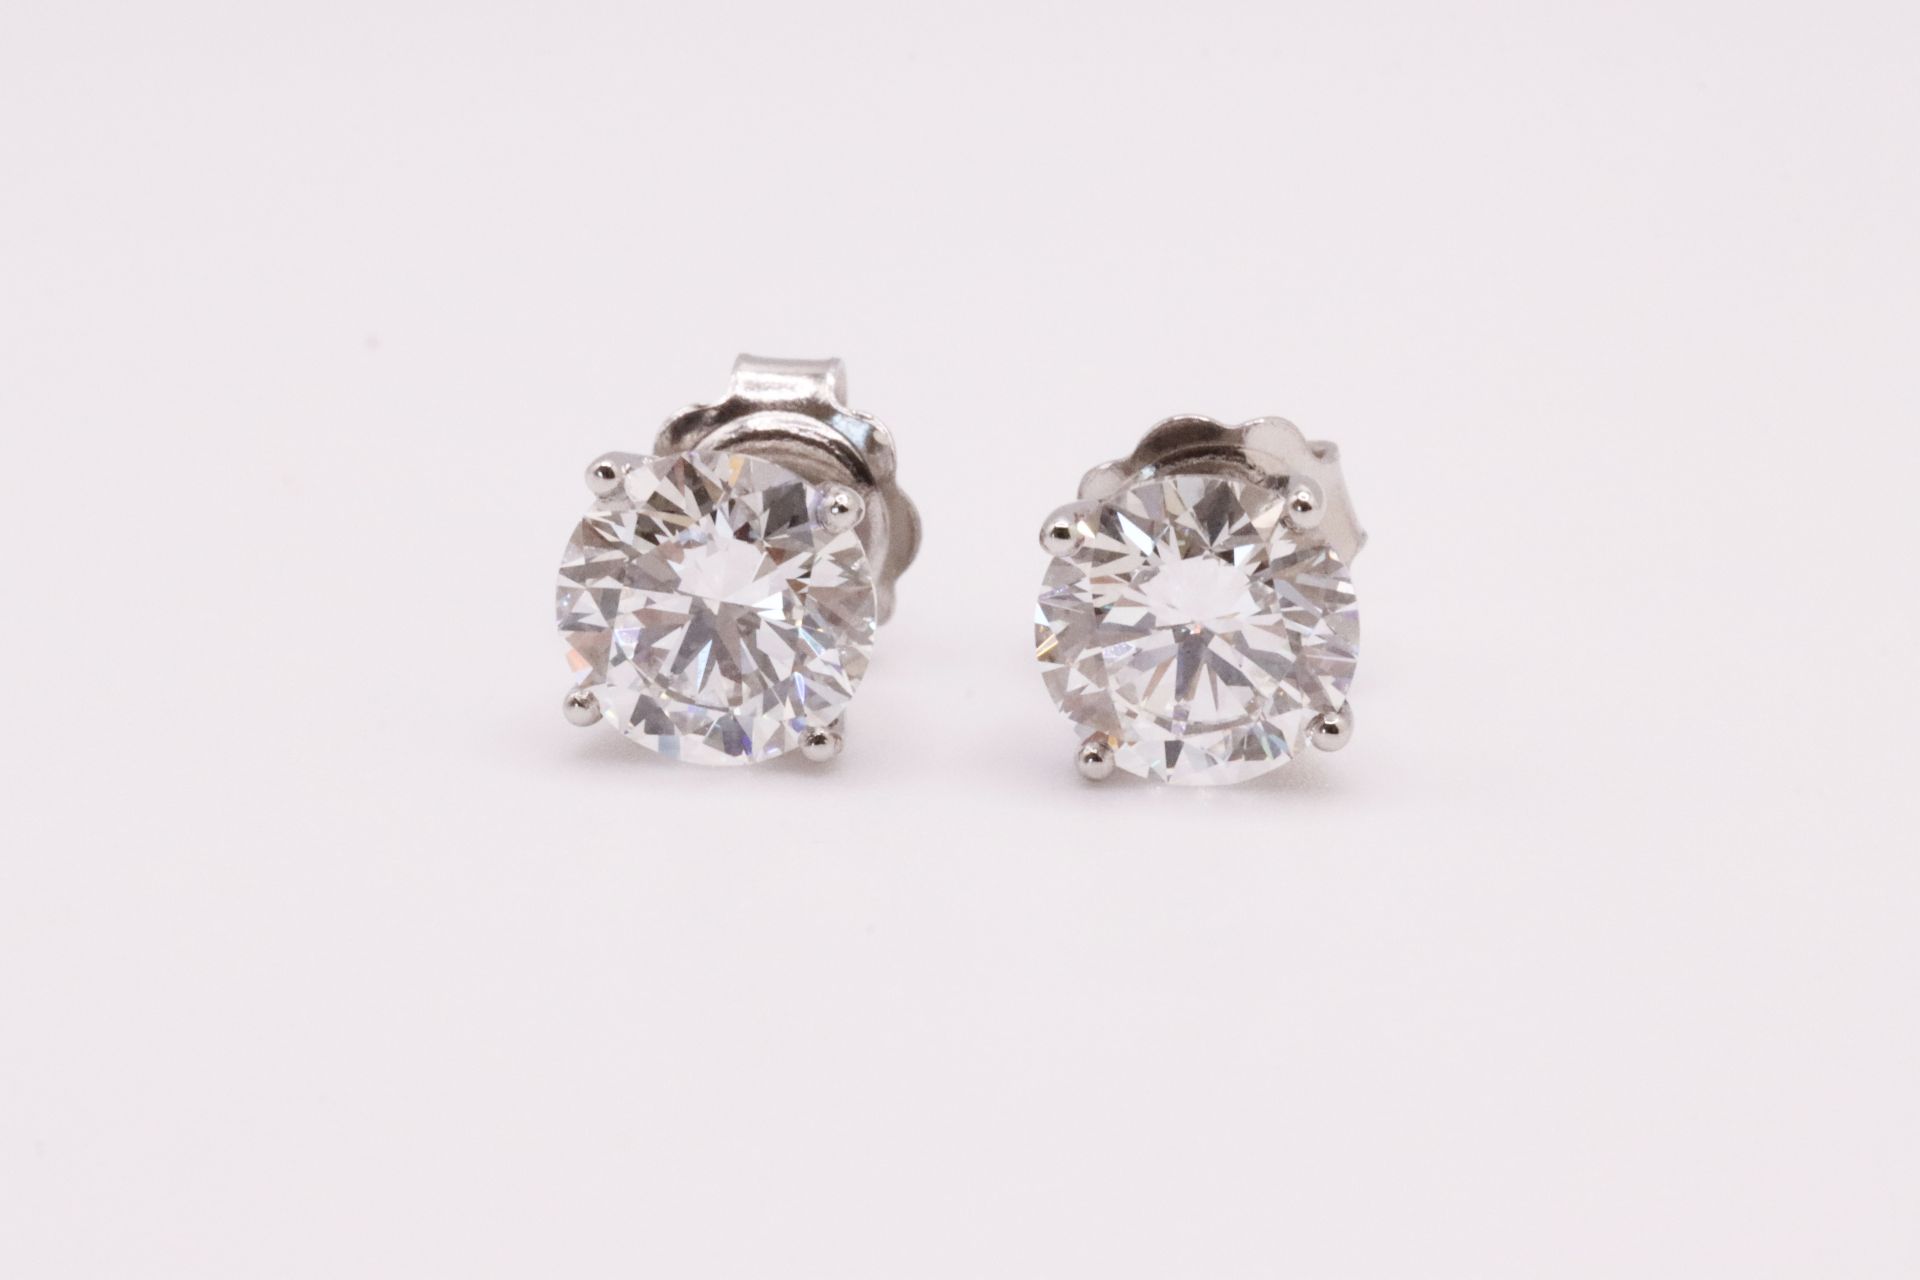 ** ON SALE ** Round Brilliant Cut 2.00 Carat Diamond Earrings Set in 18kt White Gold - F Colour VVS2 - Image 3 of 5